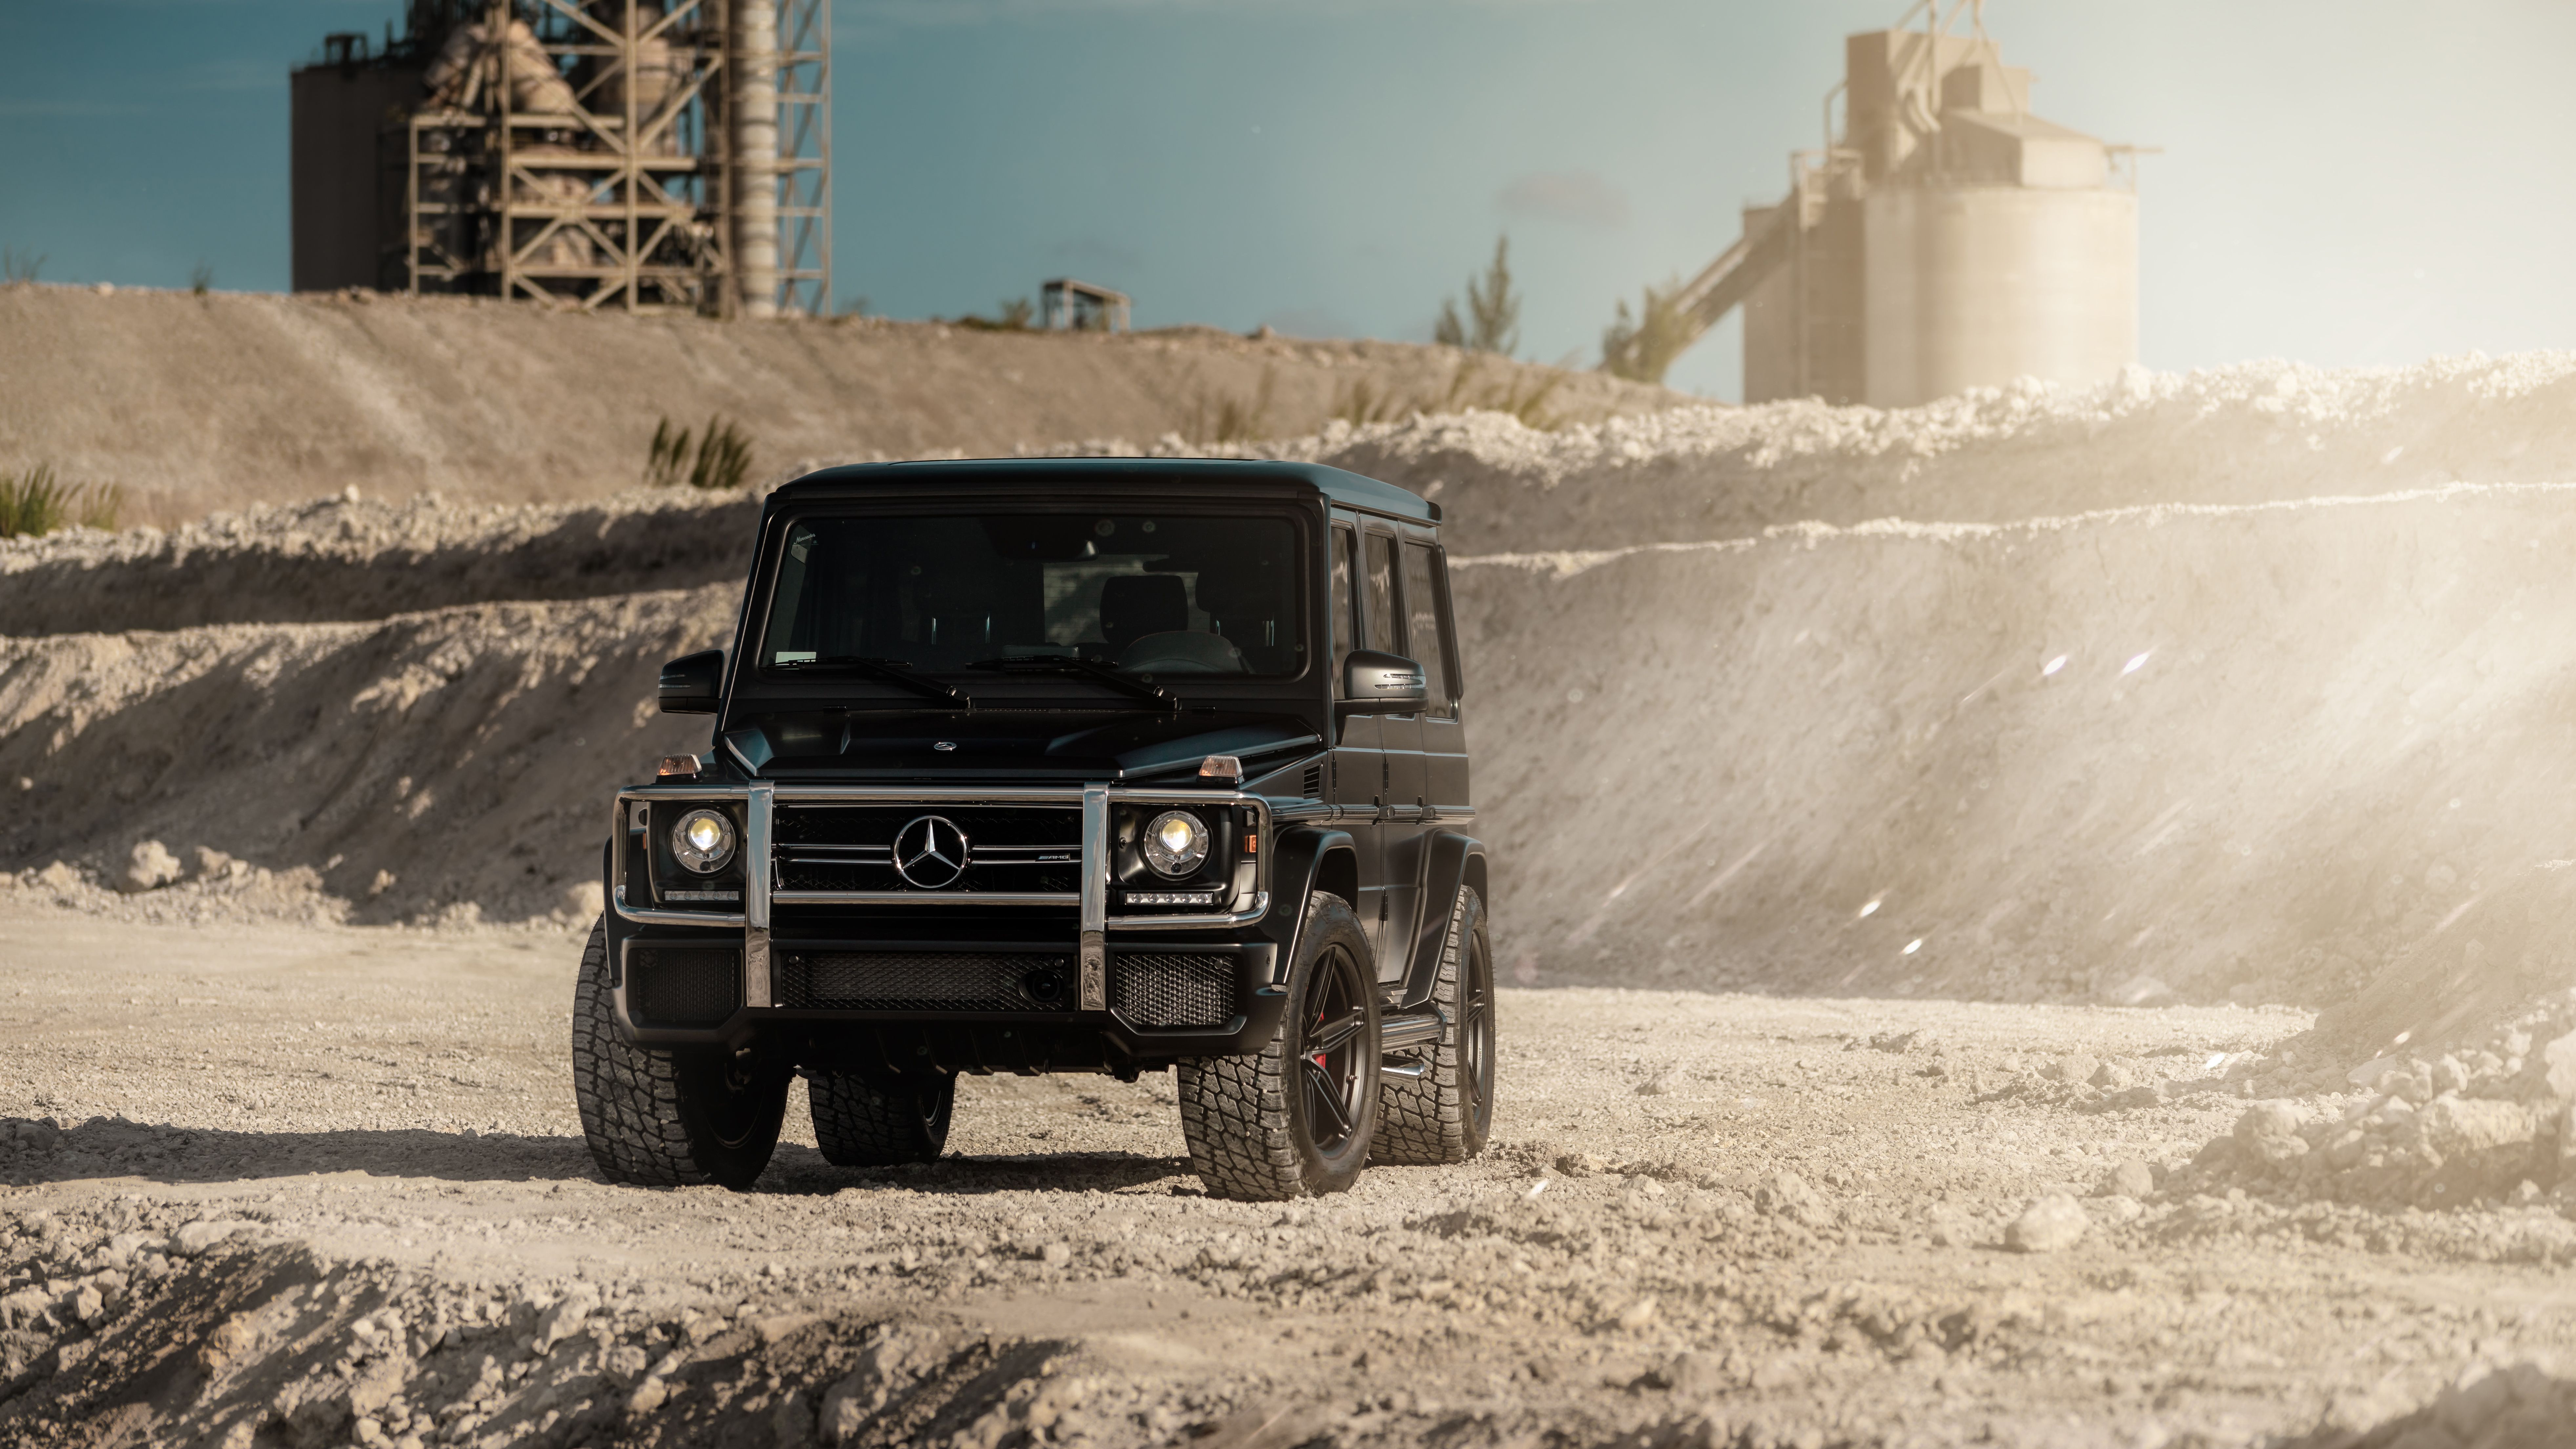 Mercedes G Wagon 8k Wallpaper, HD Cars Wallpaper, 4k Wallpaper, Image, Background, Photos and Picture